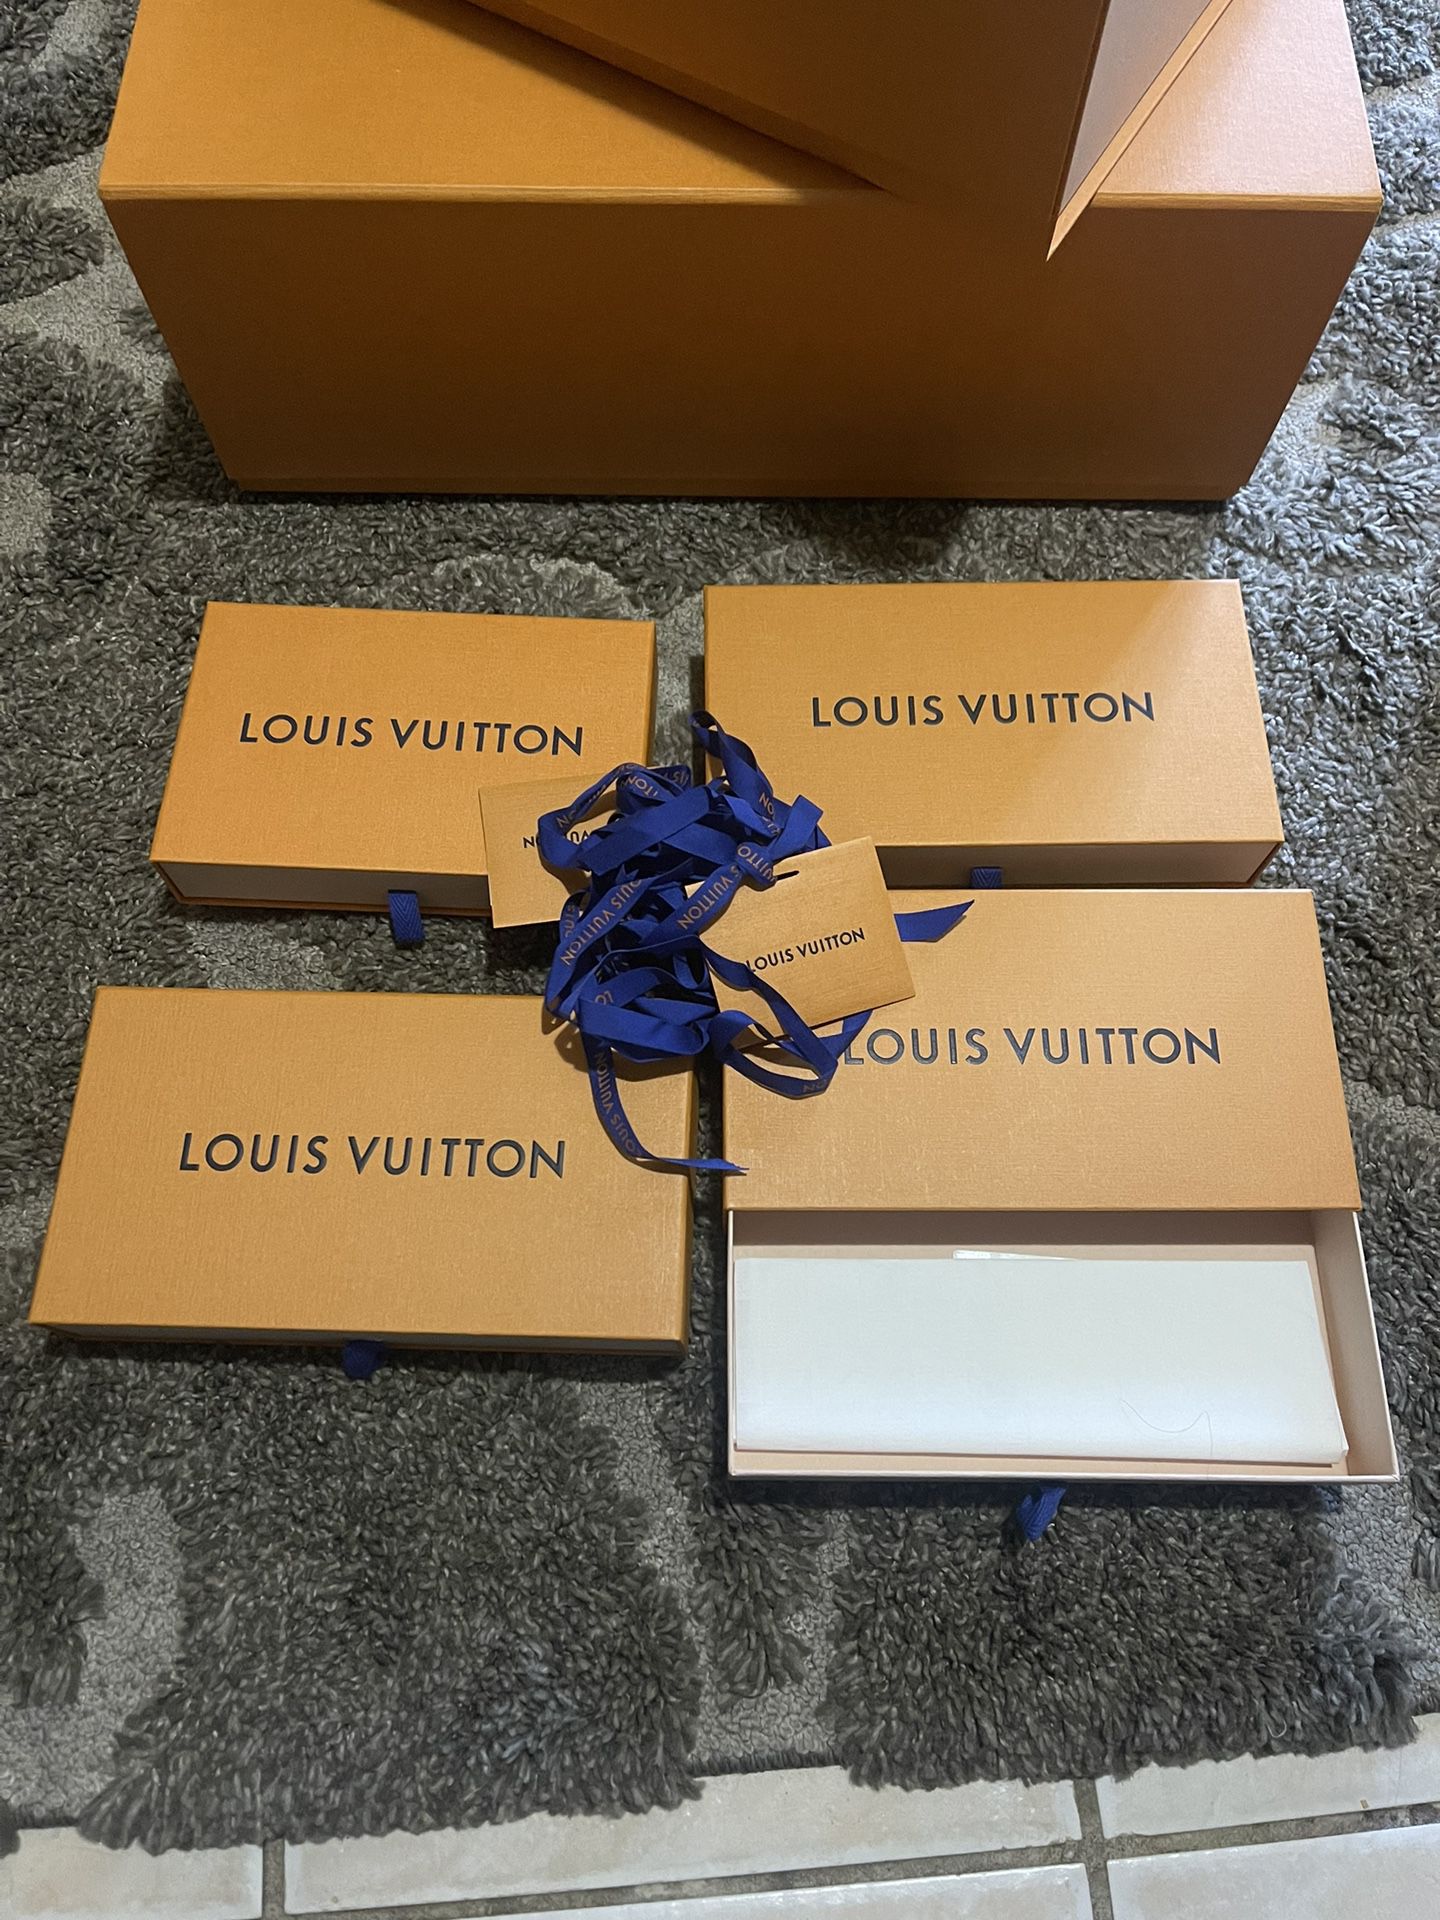 Louis Vuitton Boxes for Sale in Arcadia, CA - OfferUp